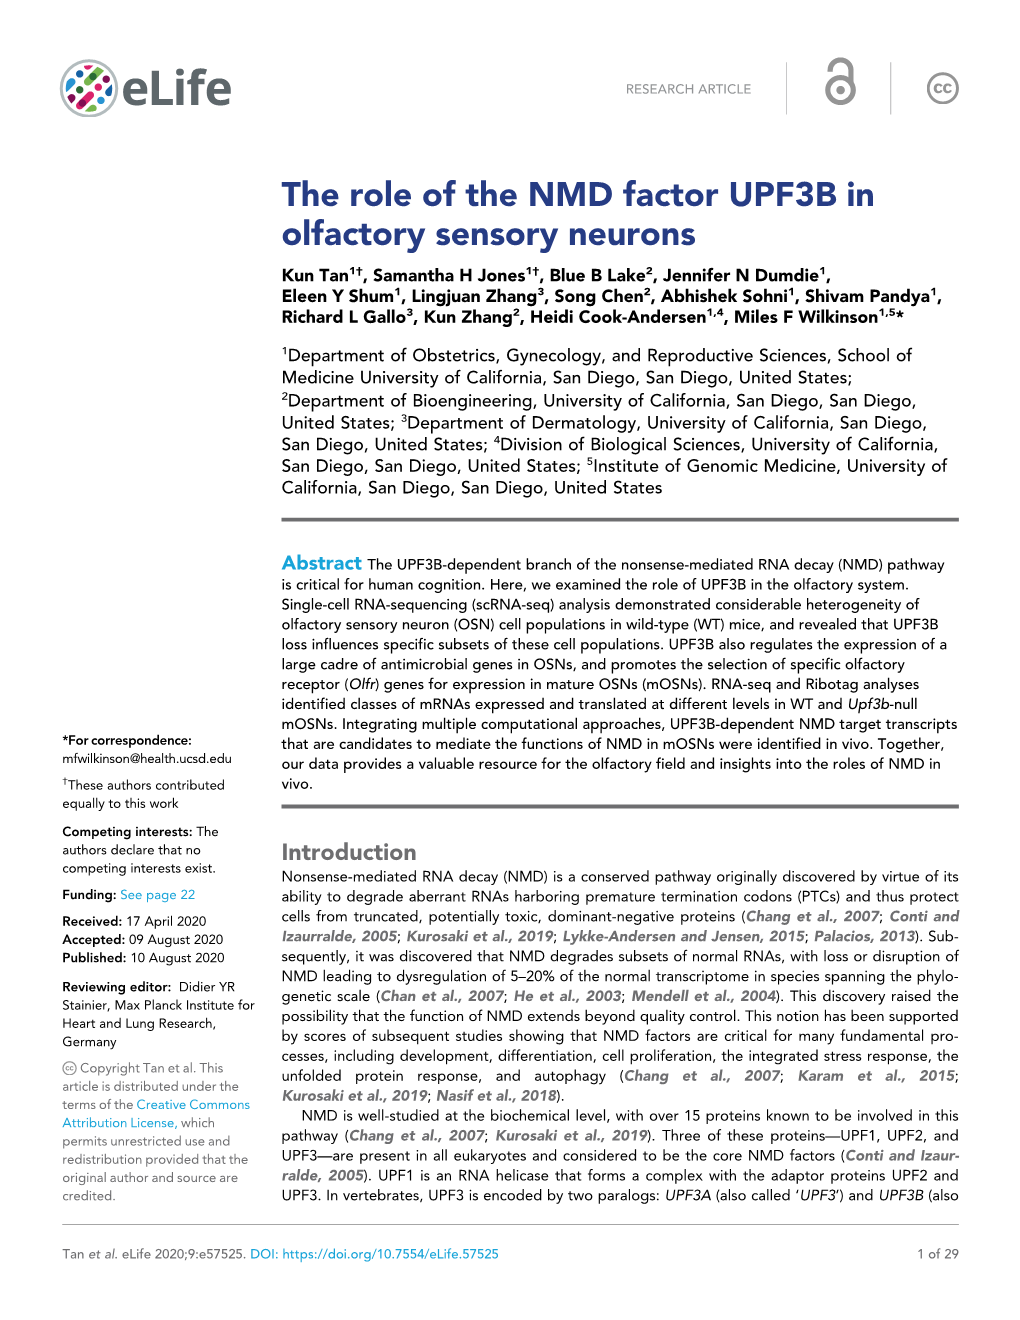 The Role of the NMD Factor UPF3B in Olfactory Sensory Neurons